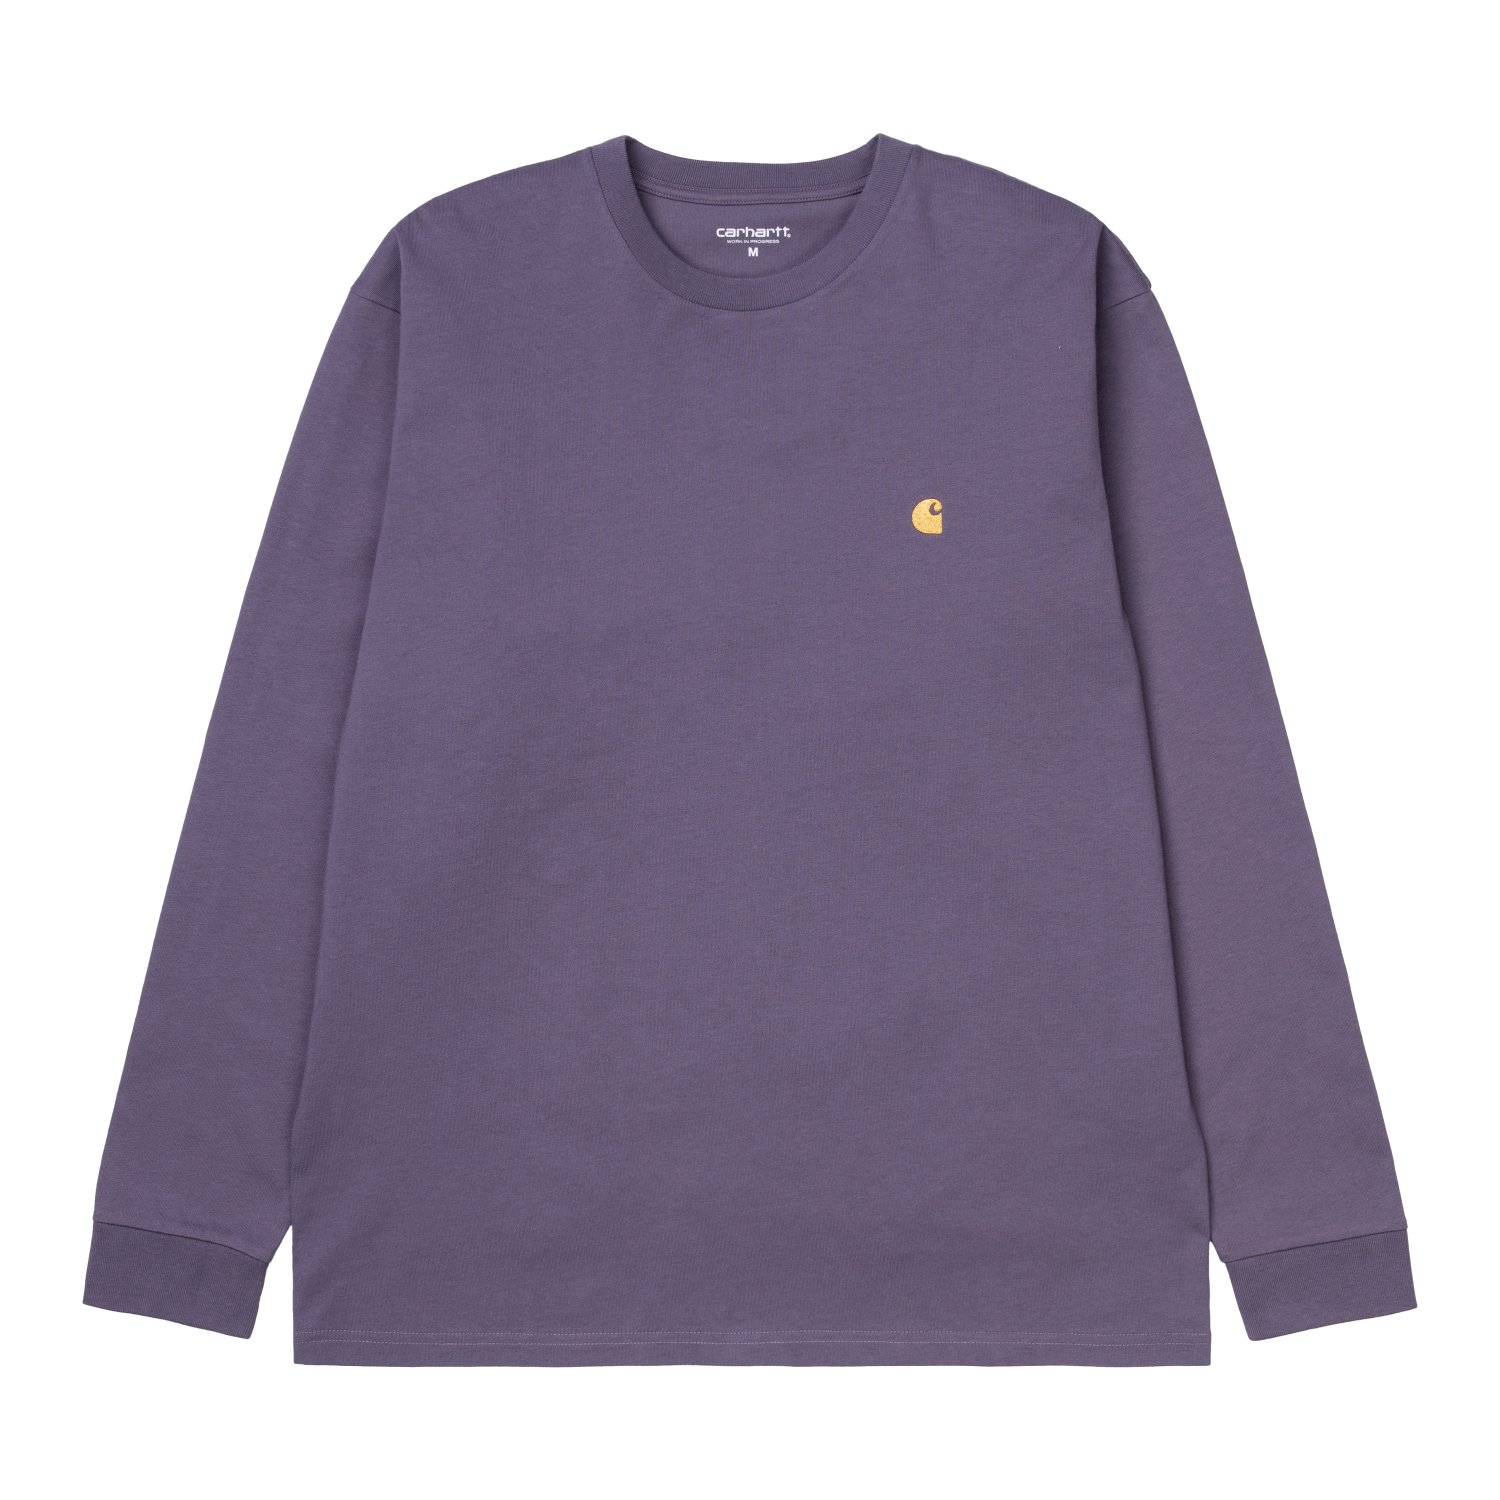 Carhartt LS Chase Tee - Provence/Gold